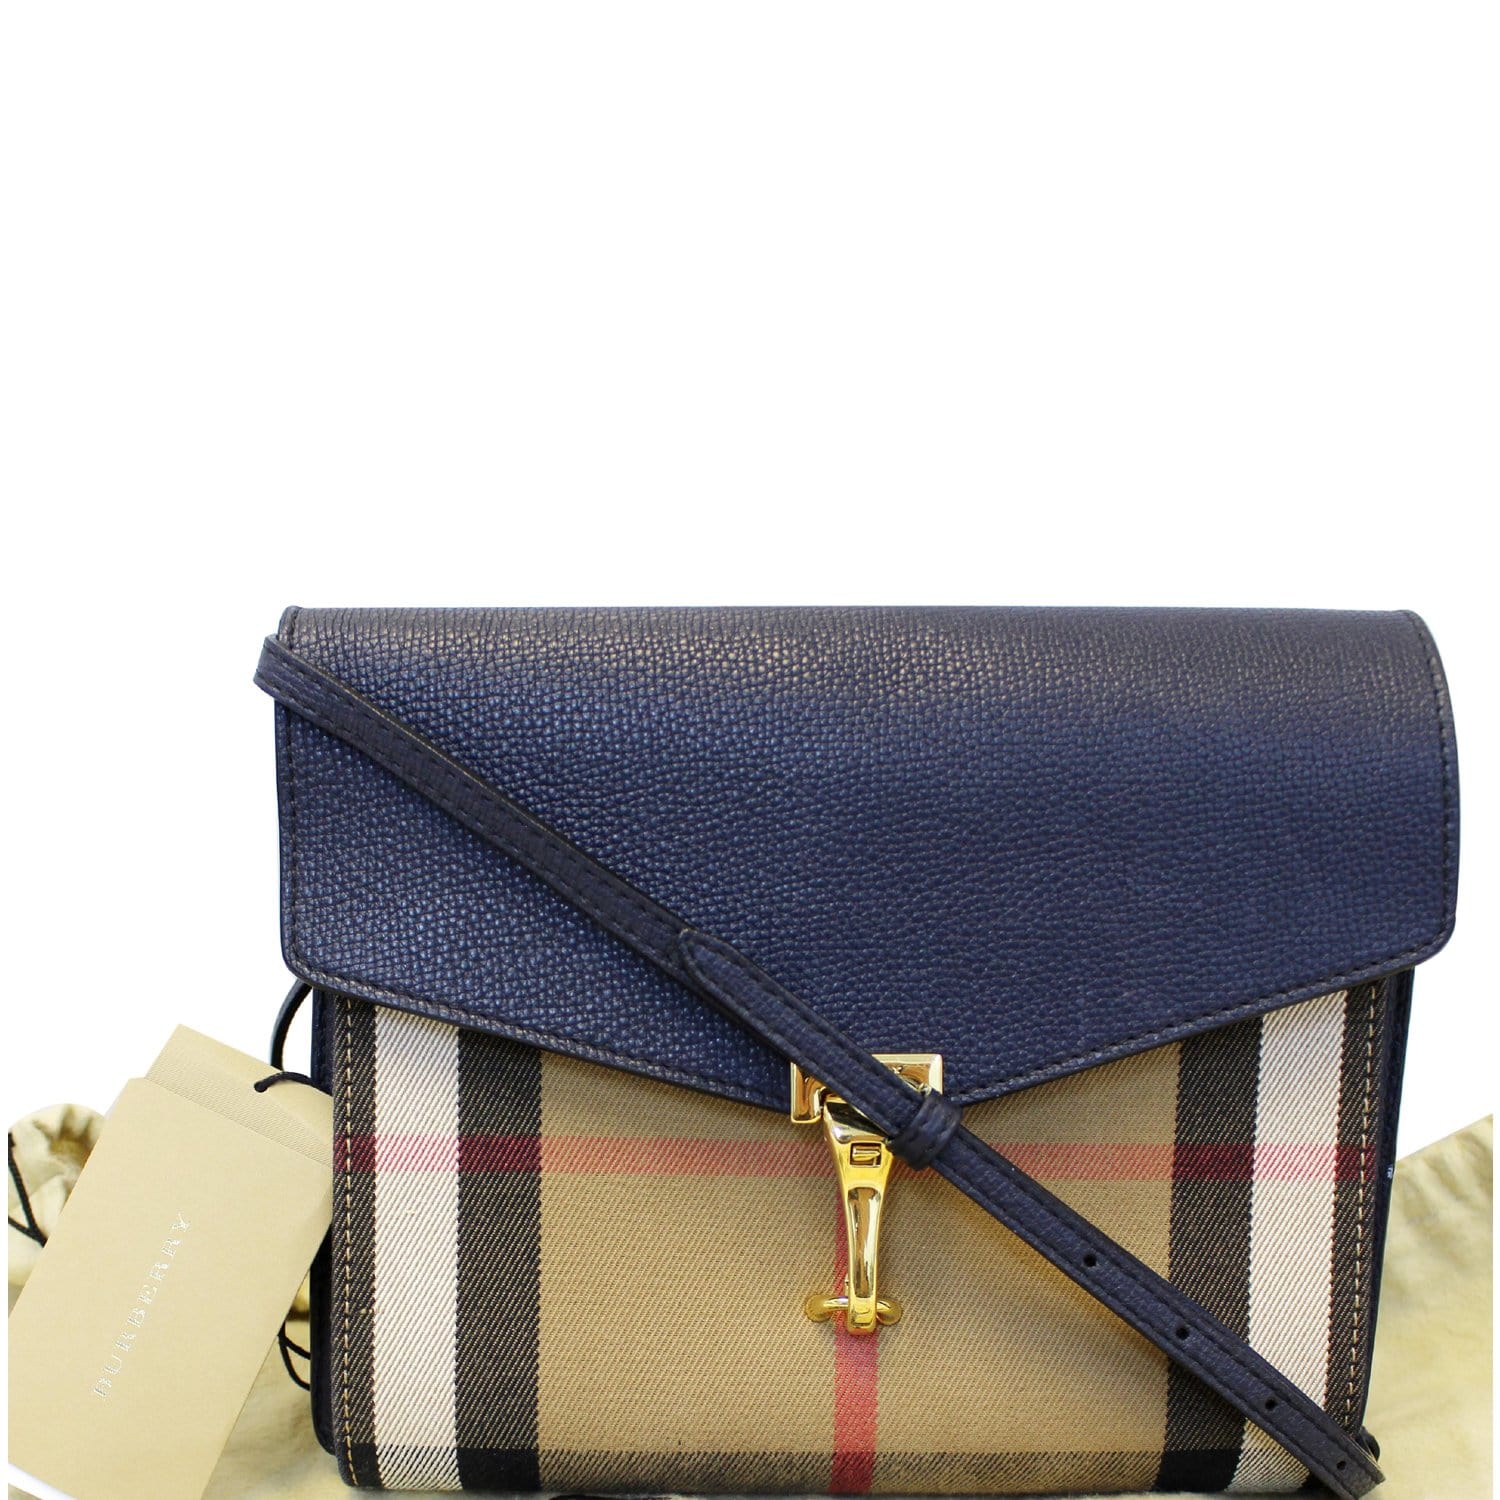 Burberry, Bags, Small Vintage Burberry Purse